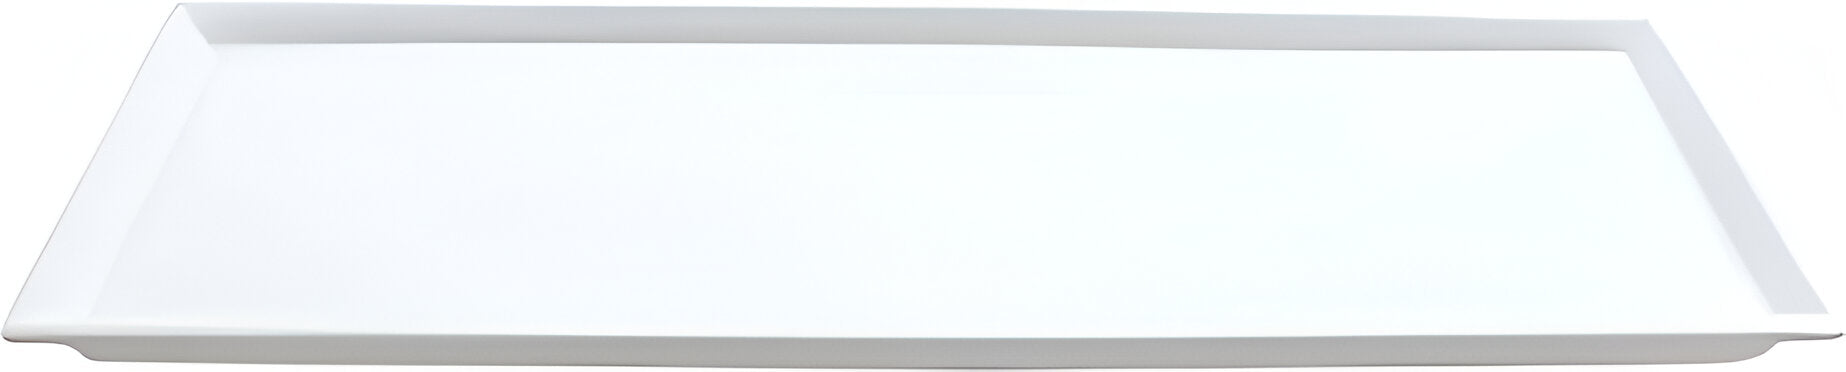 Bugambilia - Mod 20.13" White Rectangular Serving Plate With Lid Cover - LCIH1F-MOD-WW